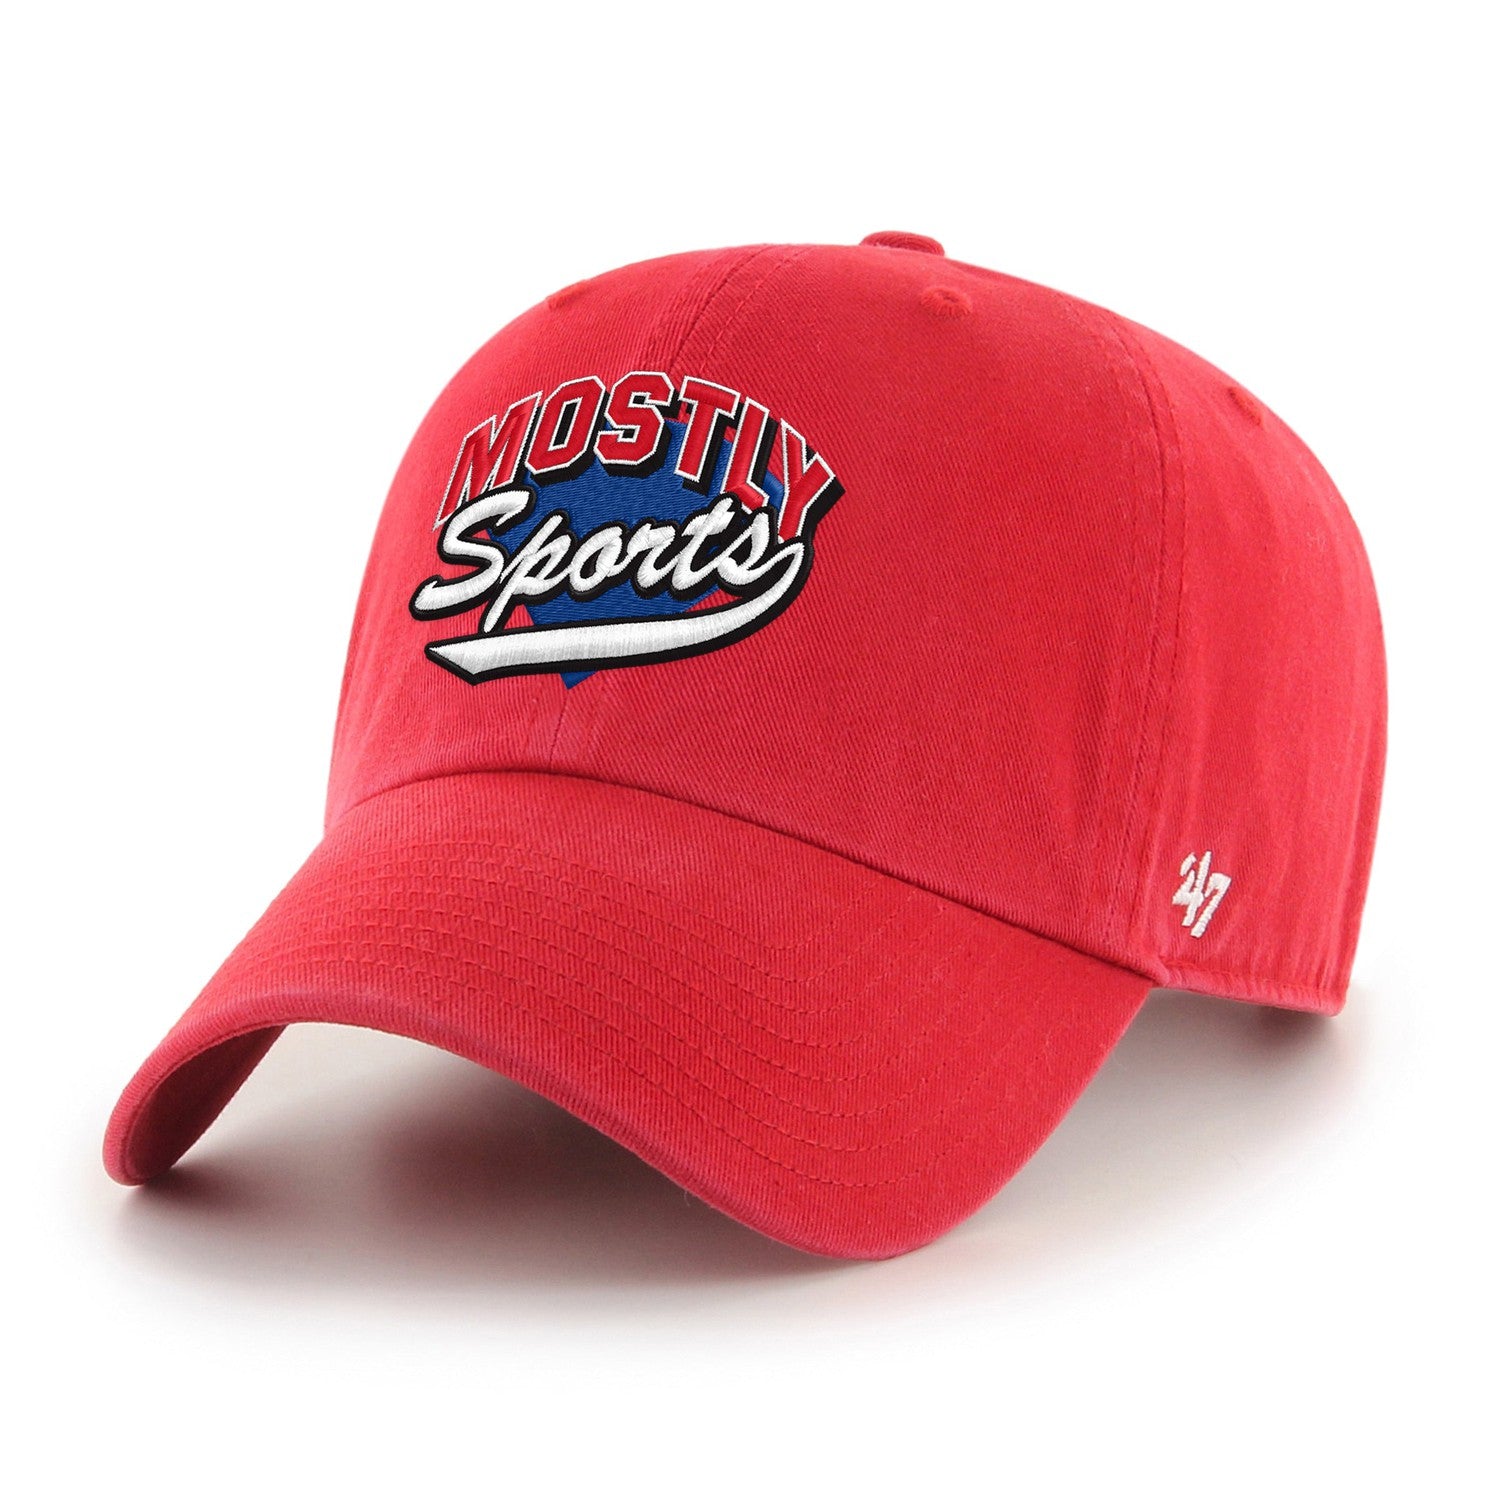 Mostly Sports x ’47 Clean Up Hat